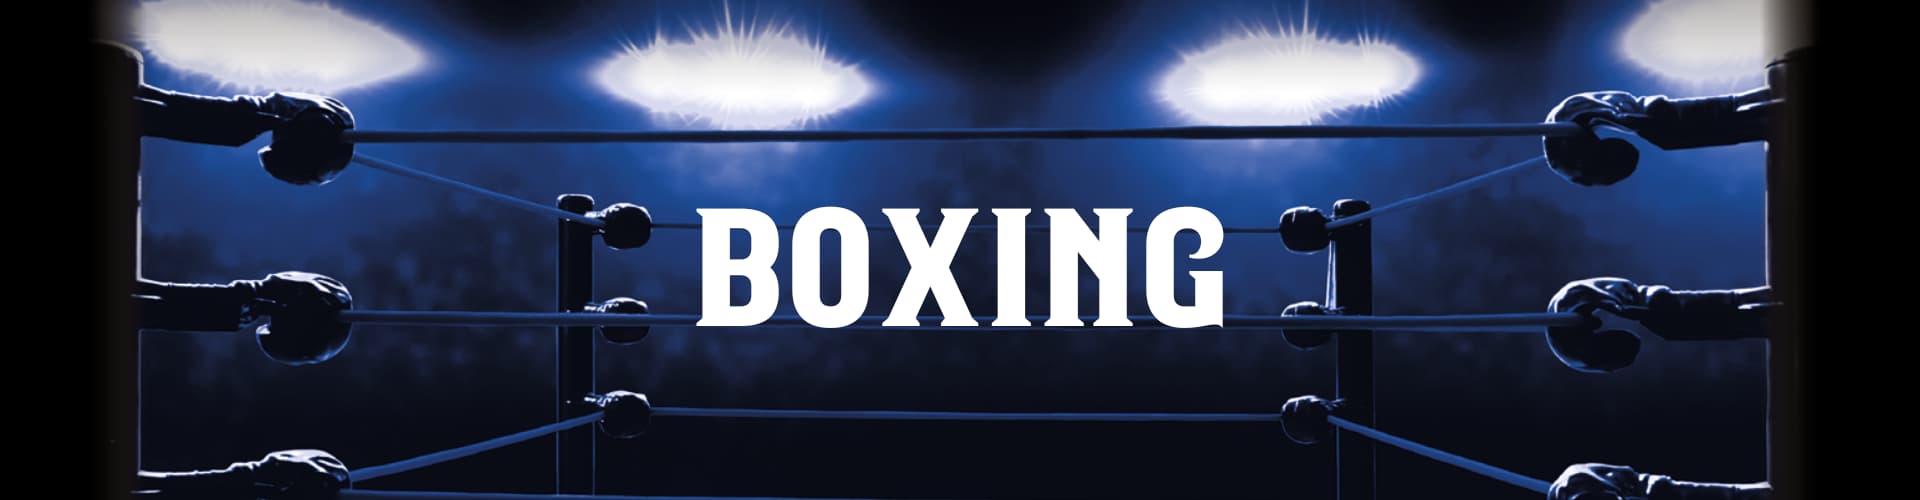 Watch Live Boxing in Newcastle upon Tyne at Percy Arms Pub